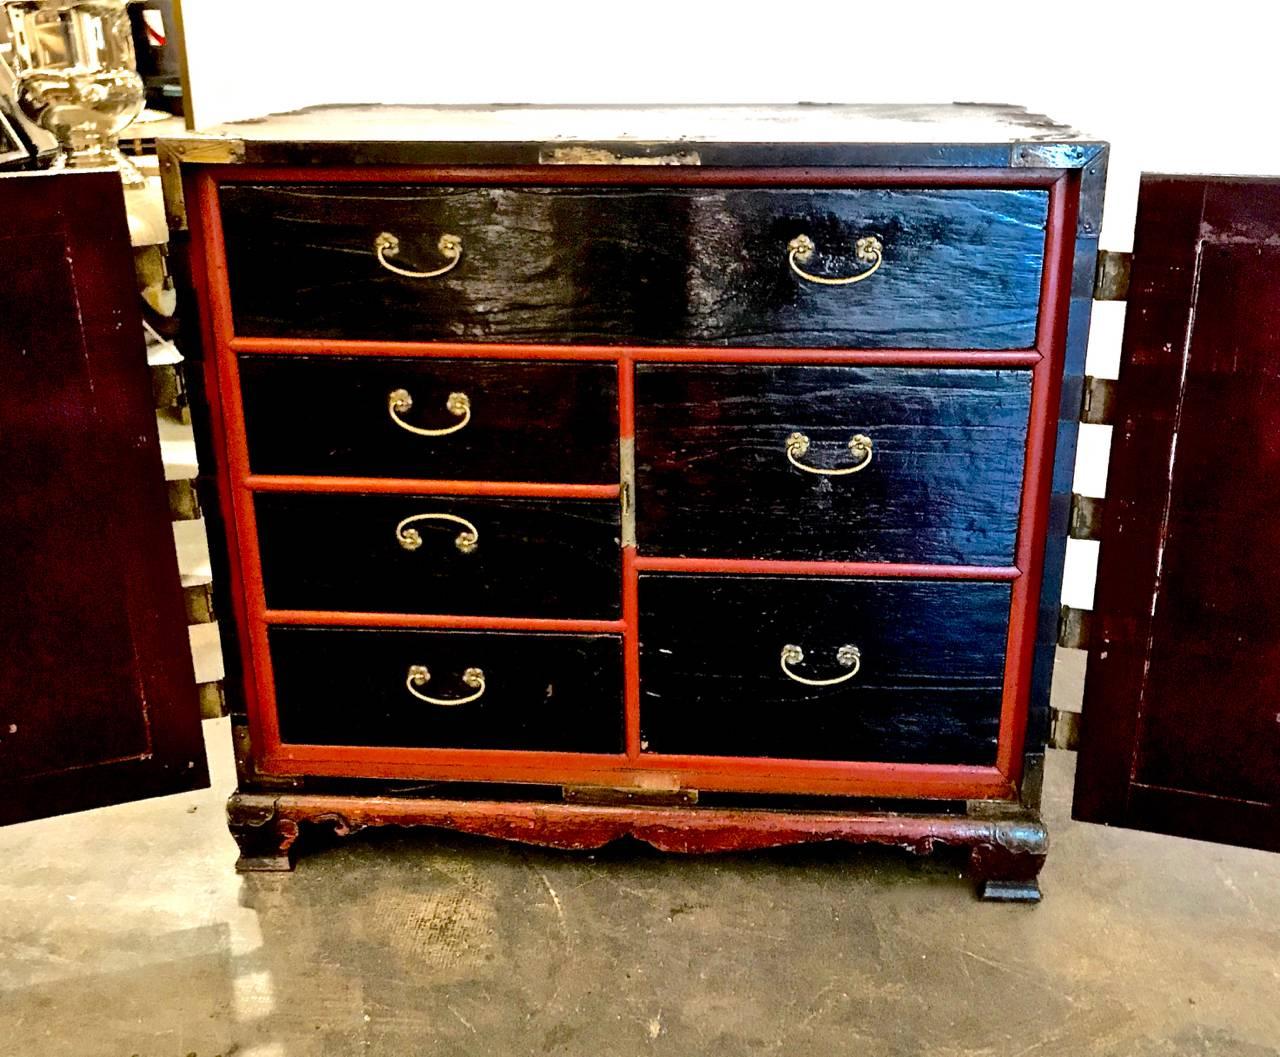 This is a wonderful multi-purpose Korean small chest on stand that features six drawers concealed behind a pair of figured wood carved doors that are finely detailed with hand chased brass mountings and lock plate. The exterior of chest is lacquered